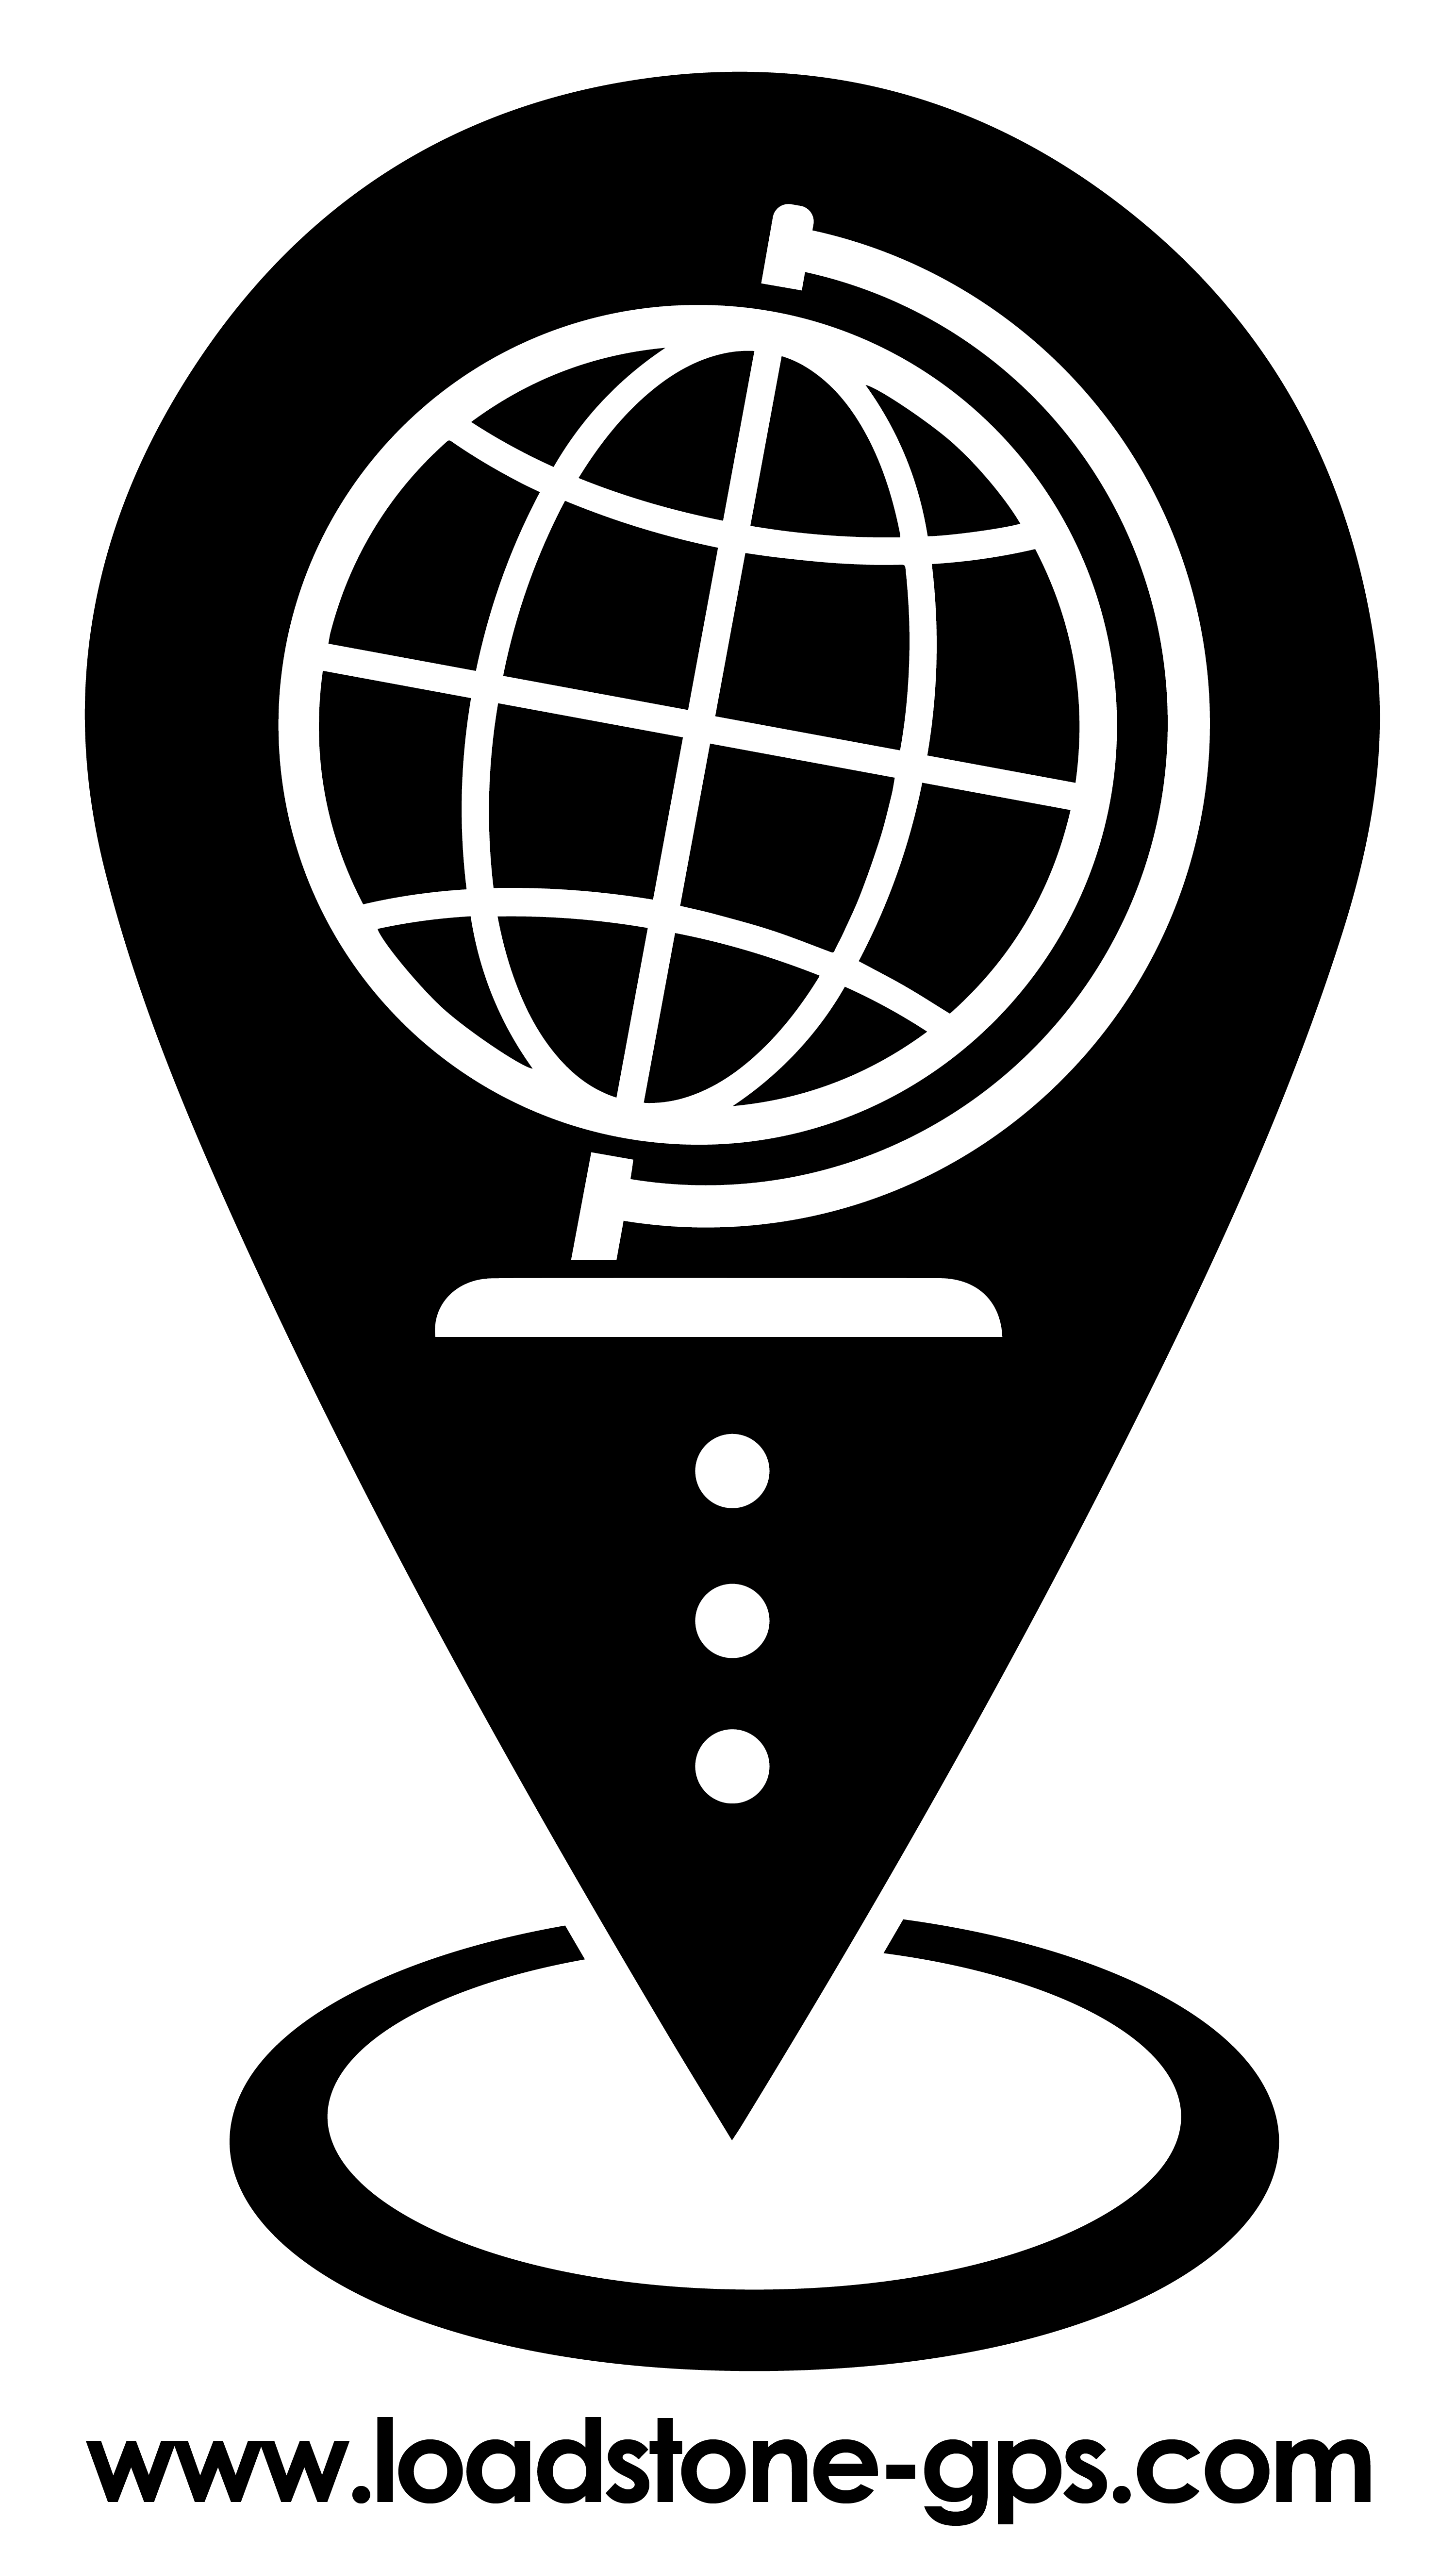 The Loadstone logo with a black locator symbol and white lines of latitude